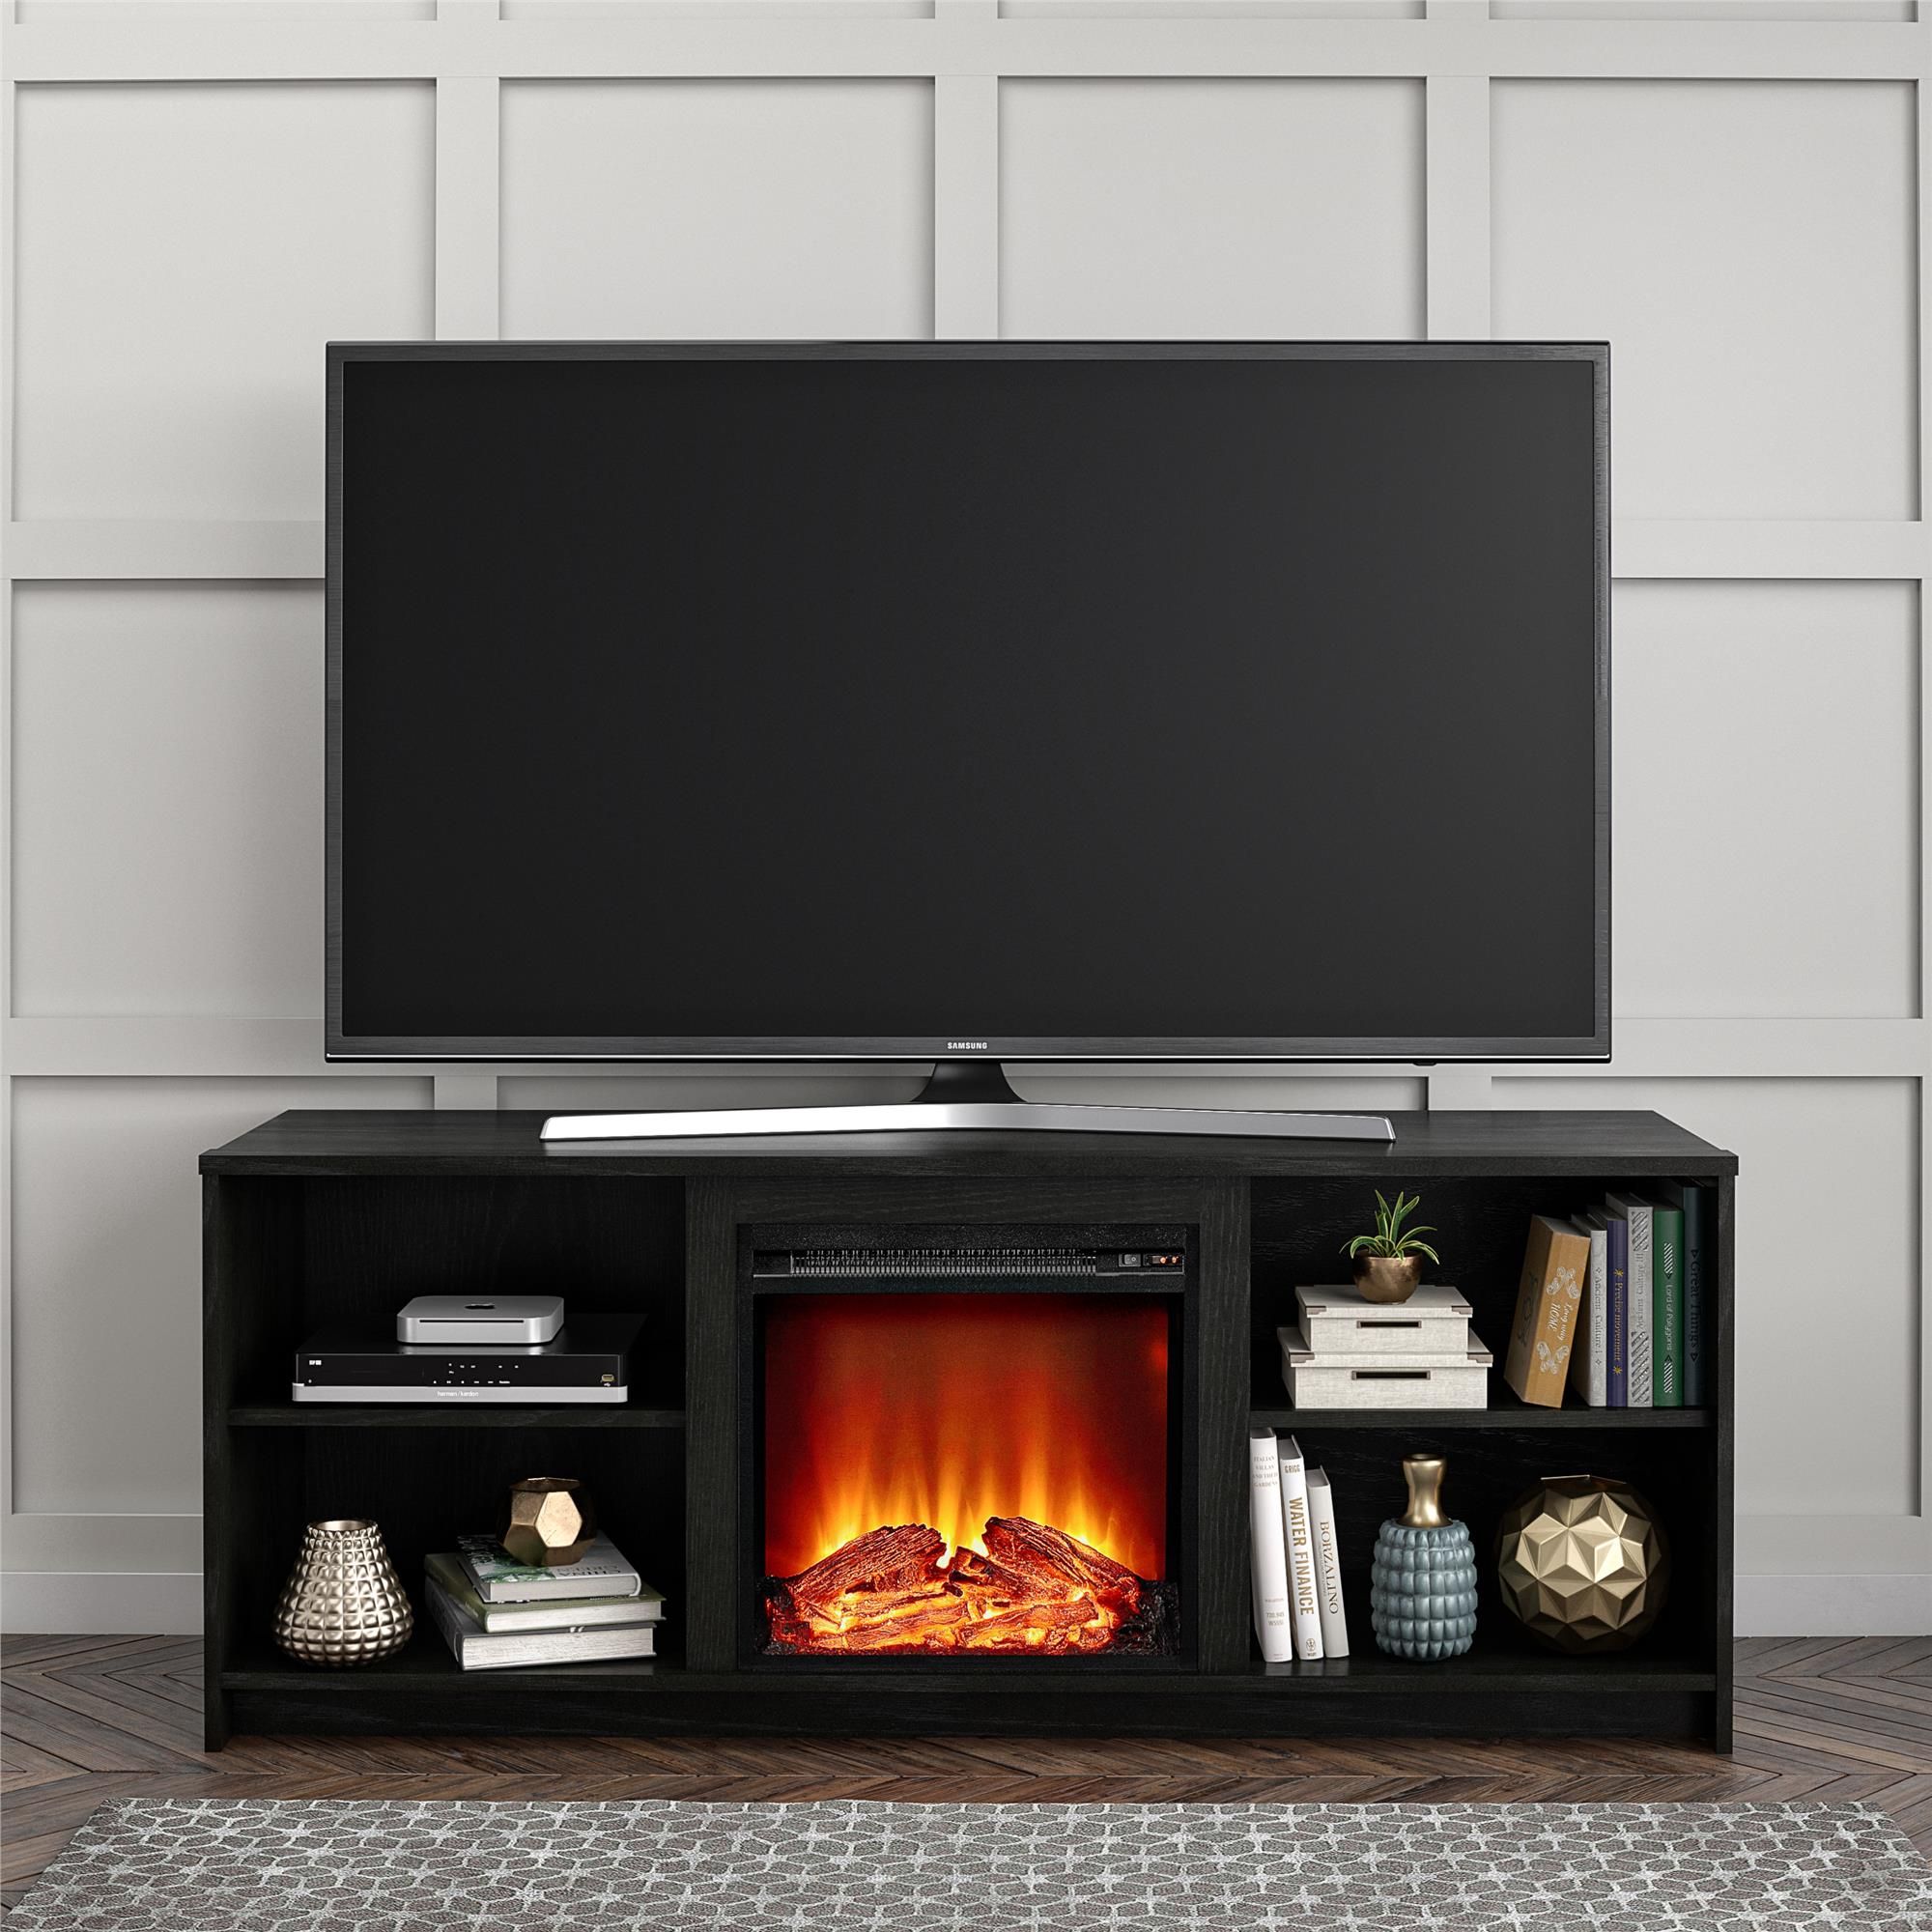 Mainstays Fireplace Tv Stand For Tvs Up To 65", Black Oak Within Edgeware Black Tv Stands (View 9 of 15)